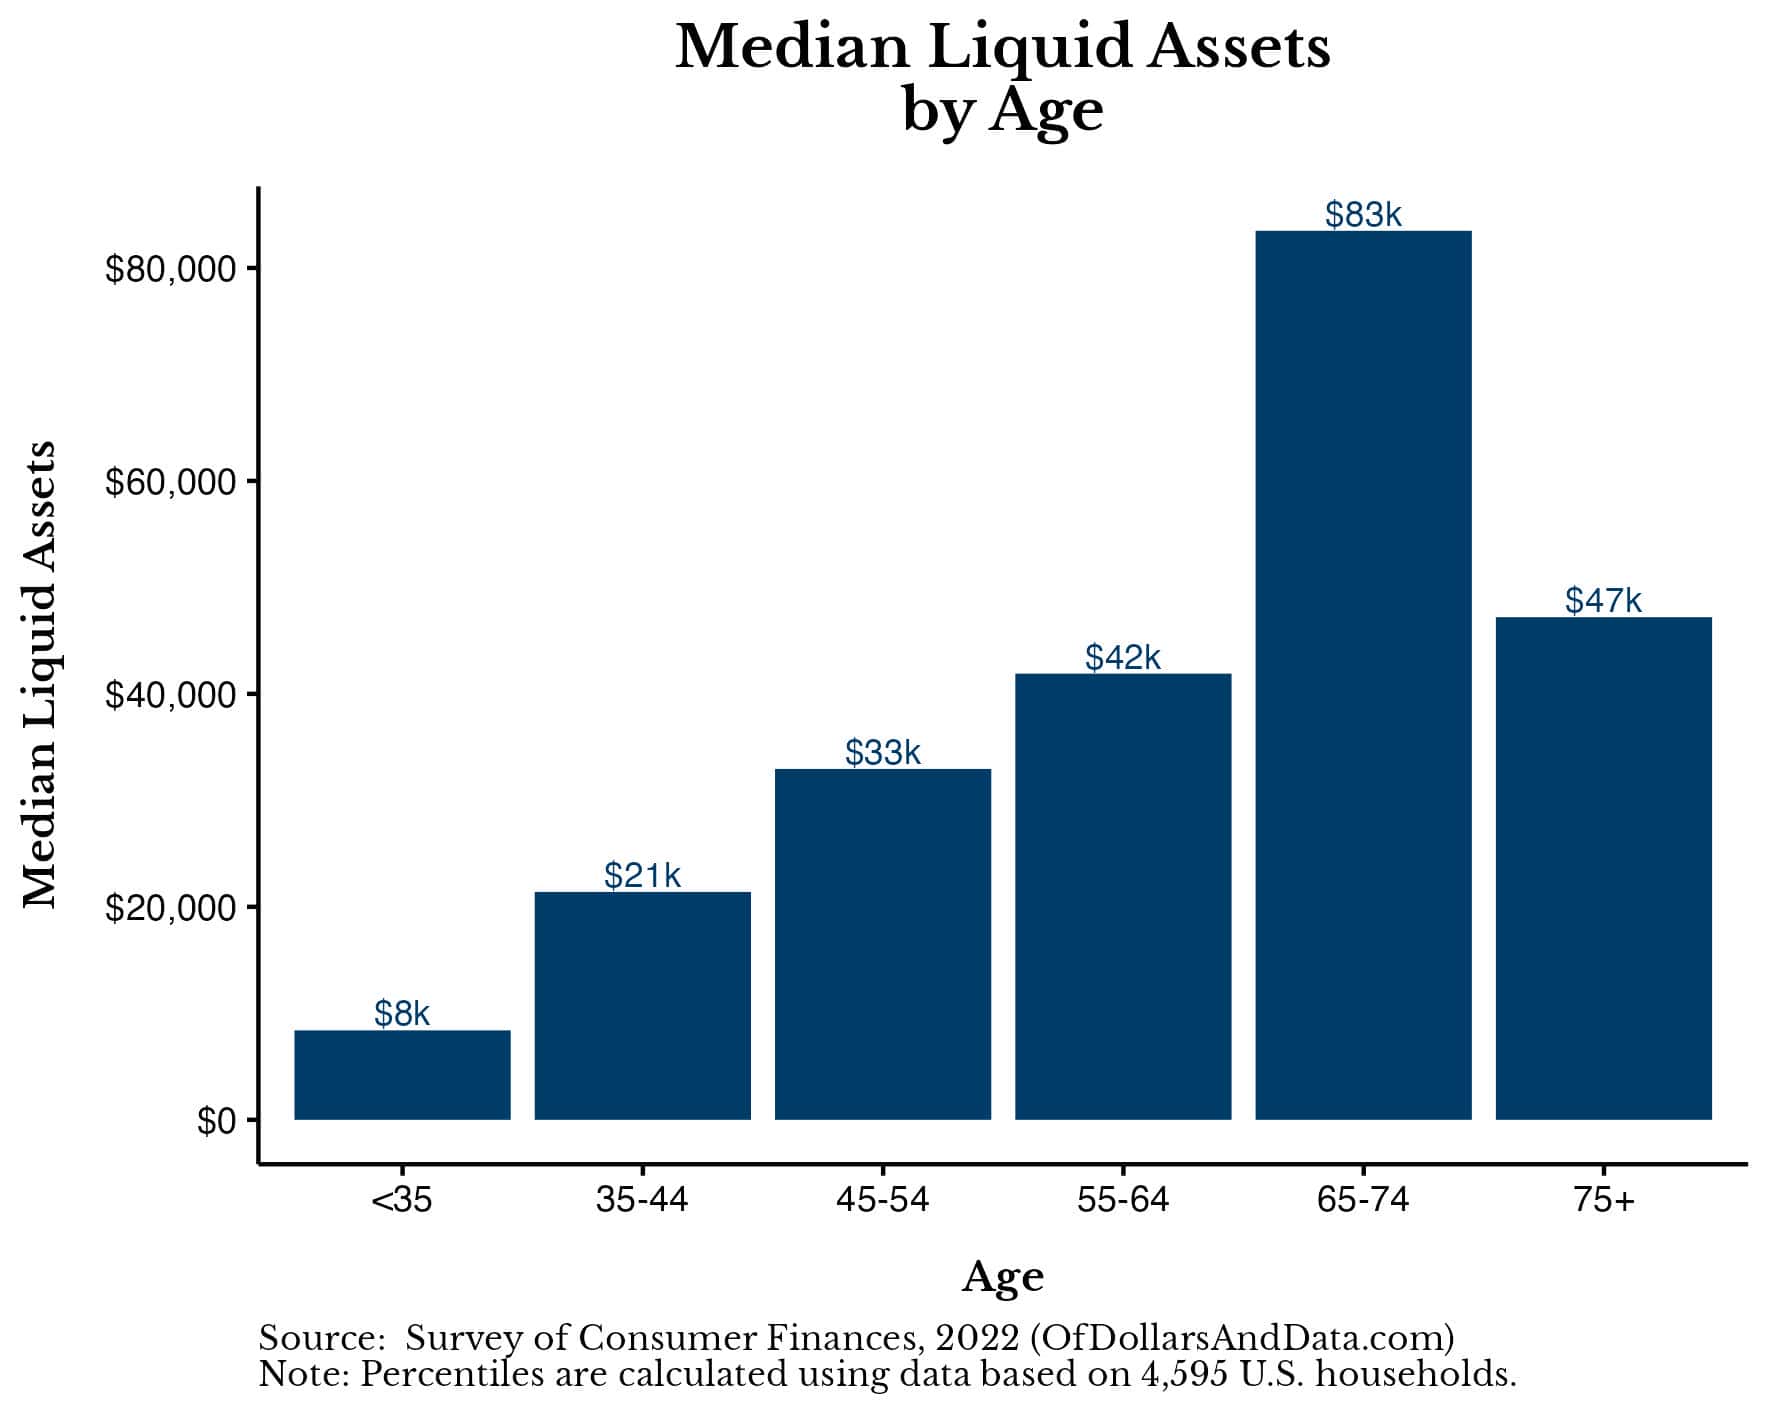 Chart showing the median liquid assets by age in 2022 for U.S. households.